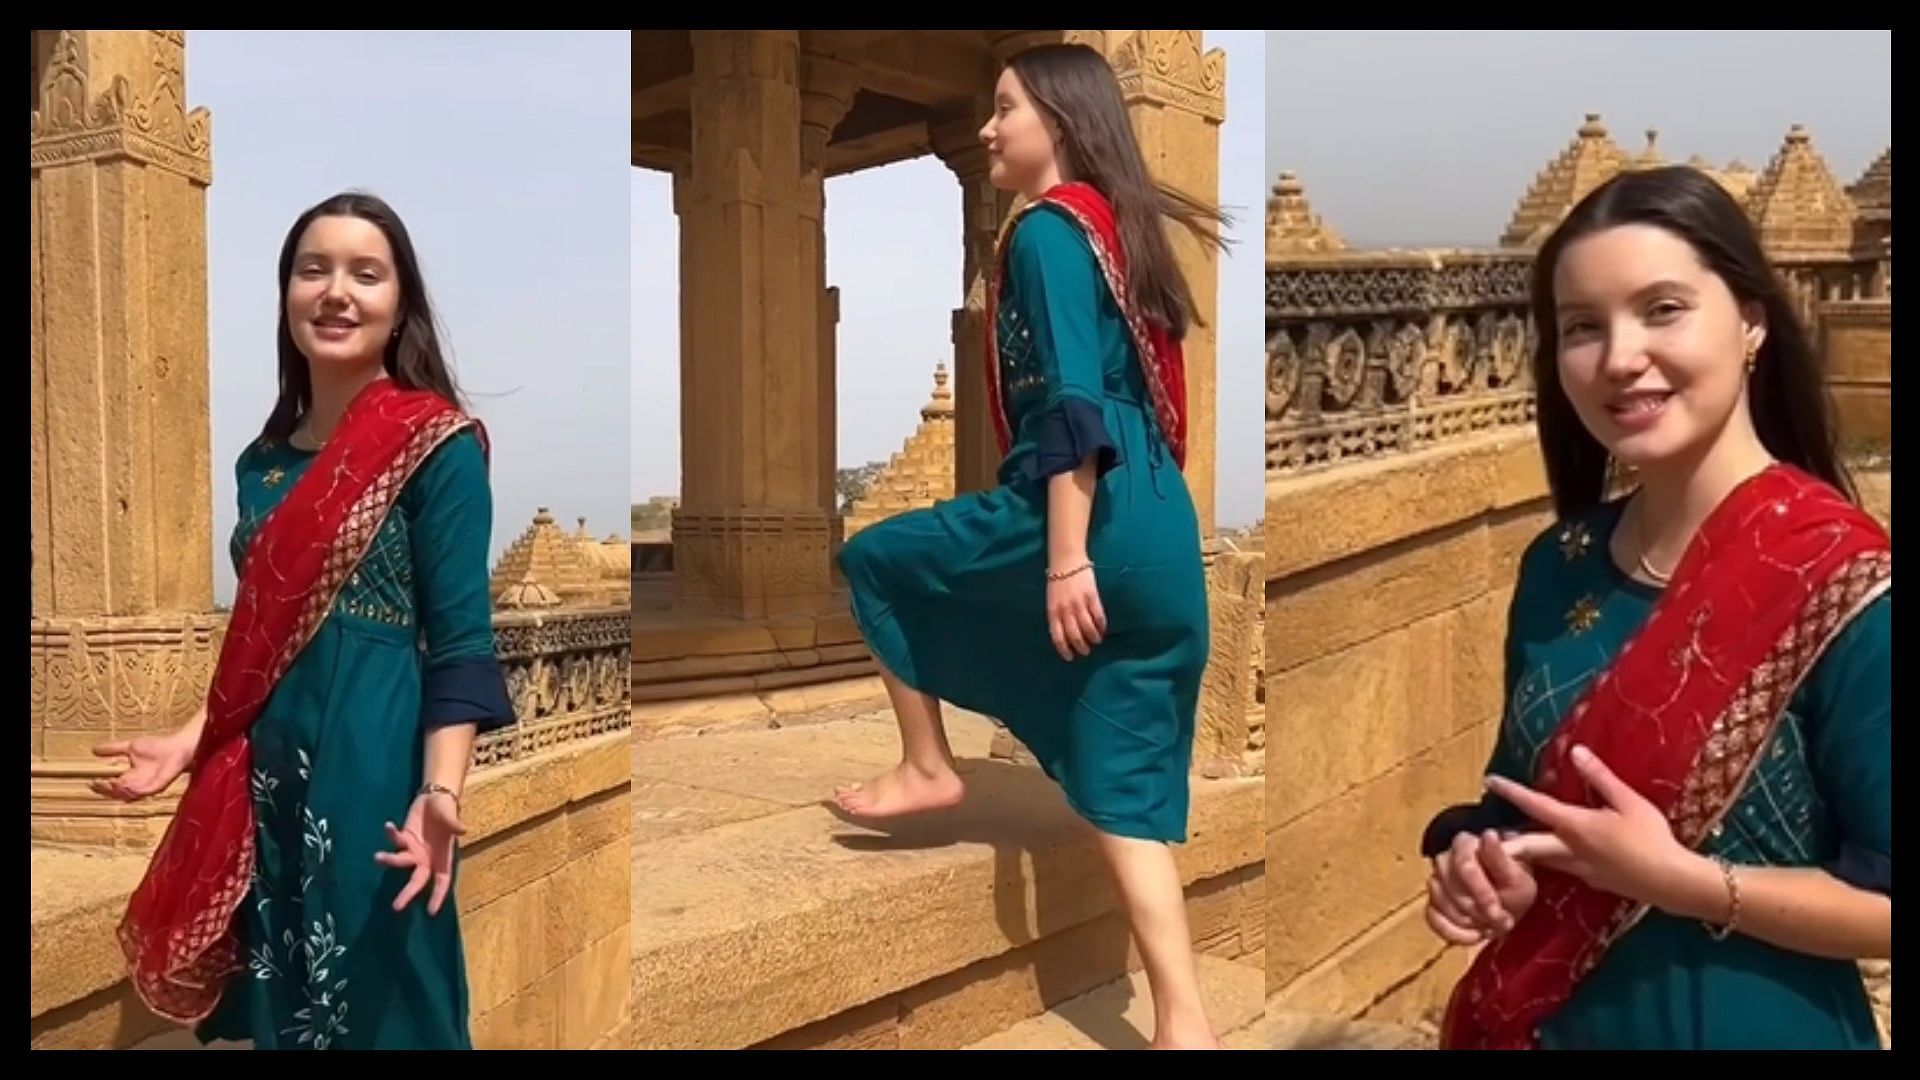 Heart touching video of foreign girl telling about Indian culture went viral on social media